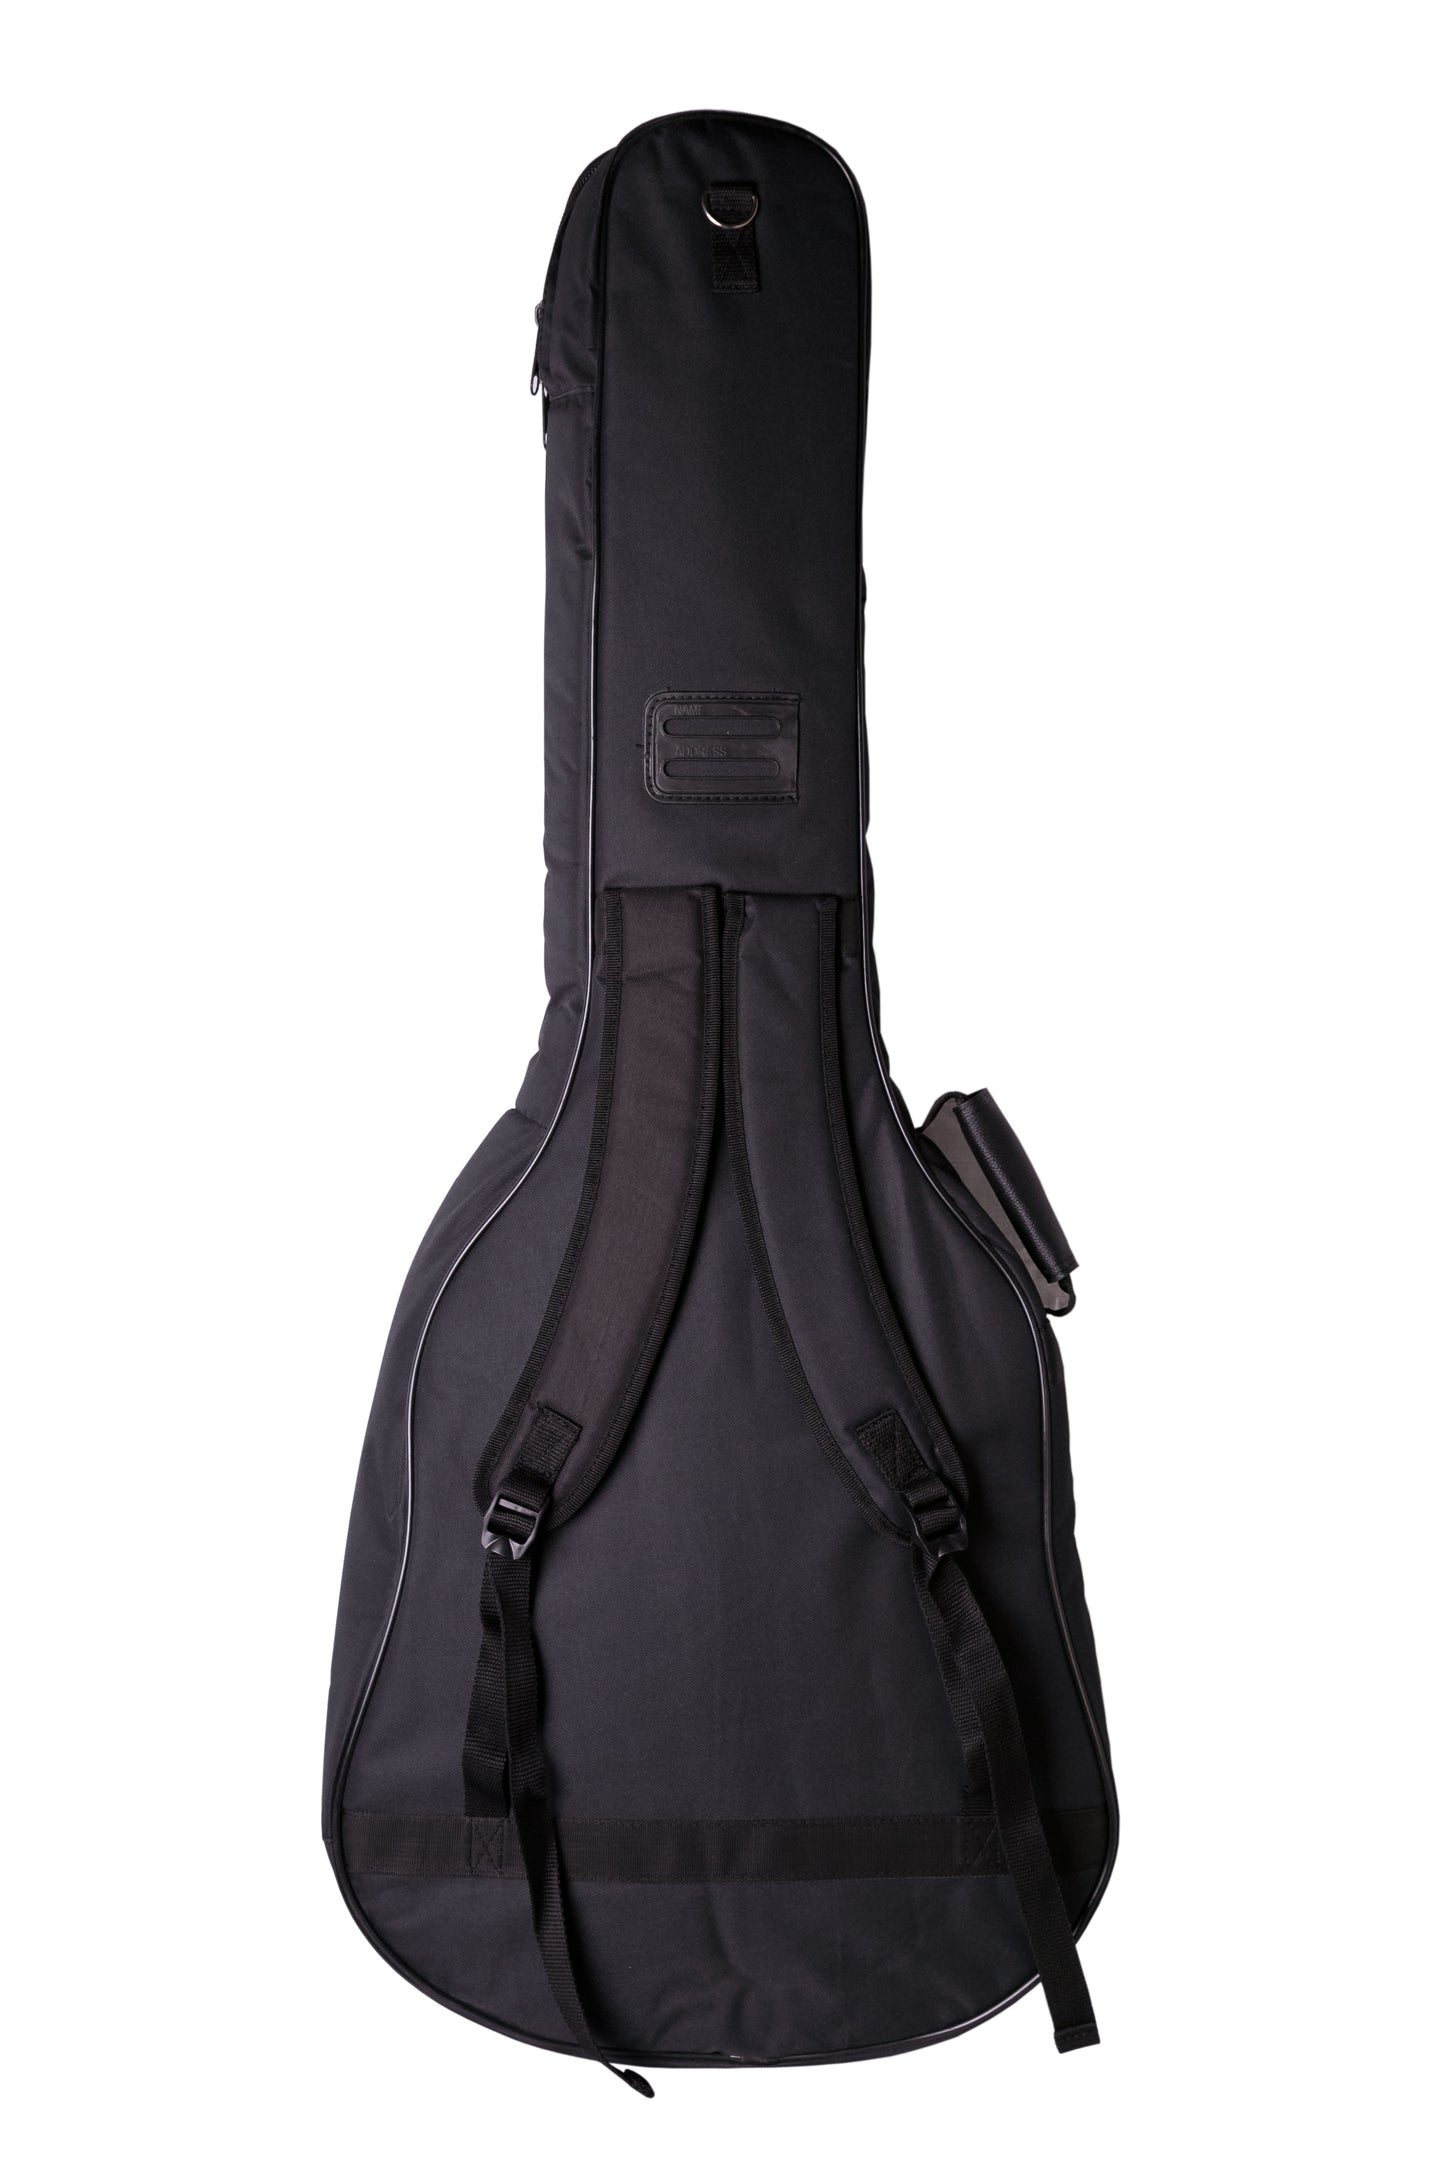 Buhne Industries Deluxe Acoustic Guitar Gig Bag